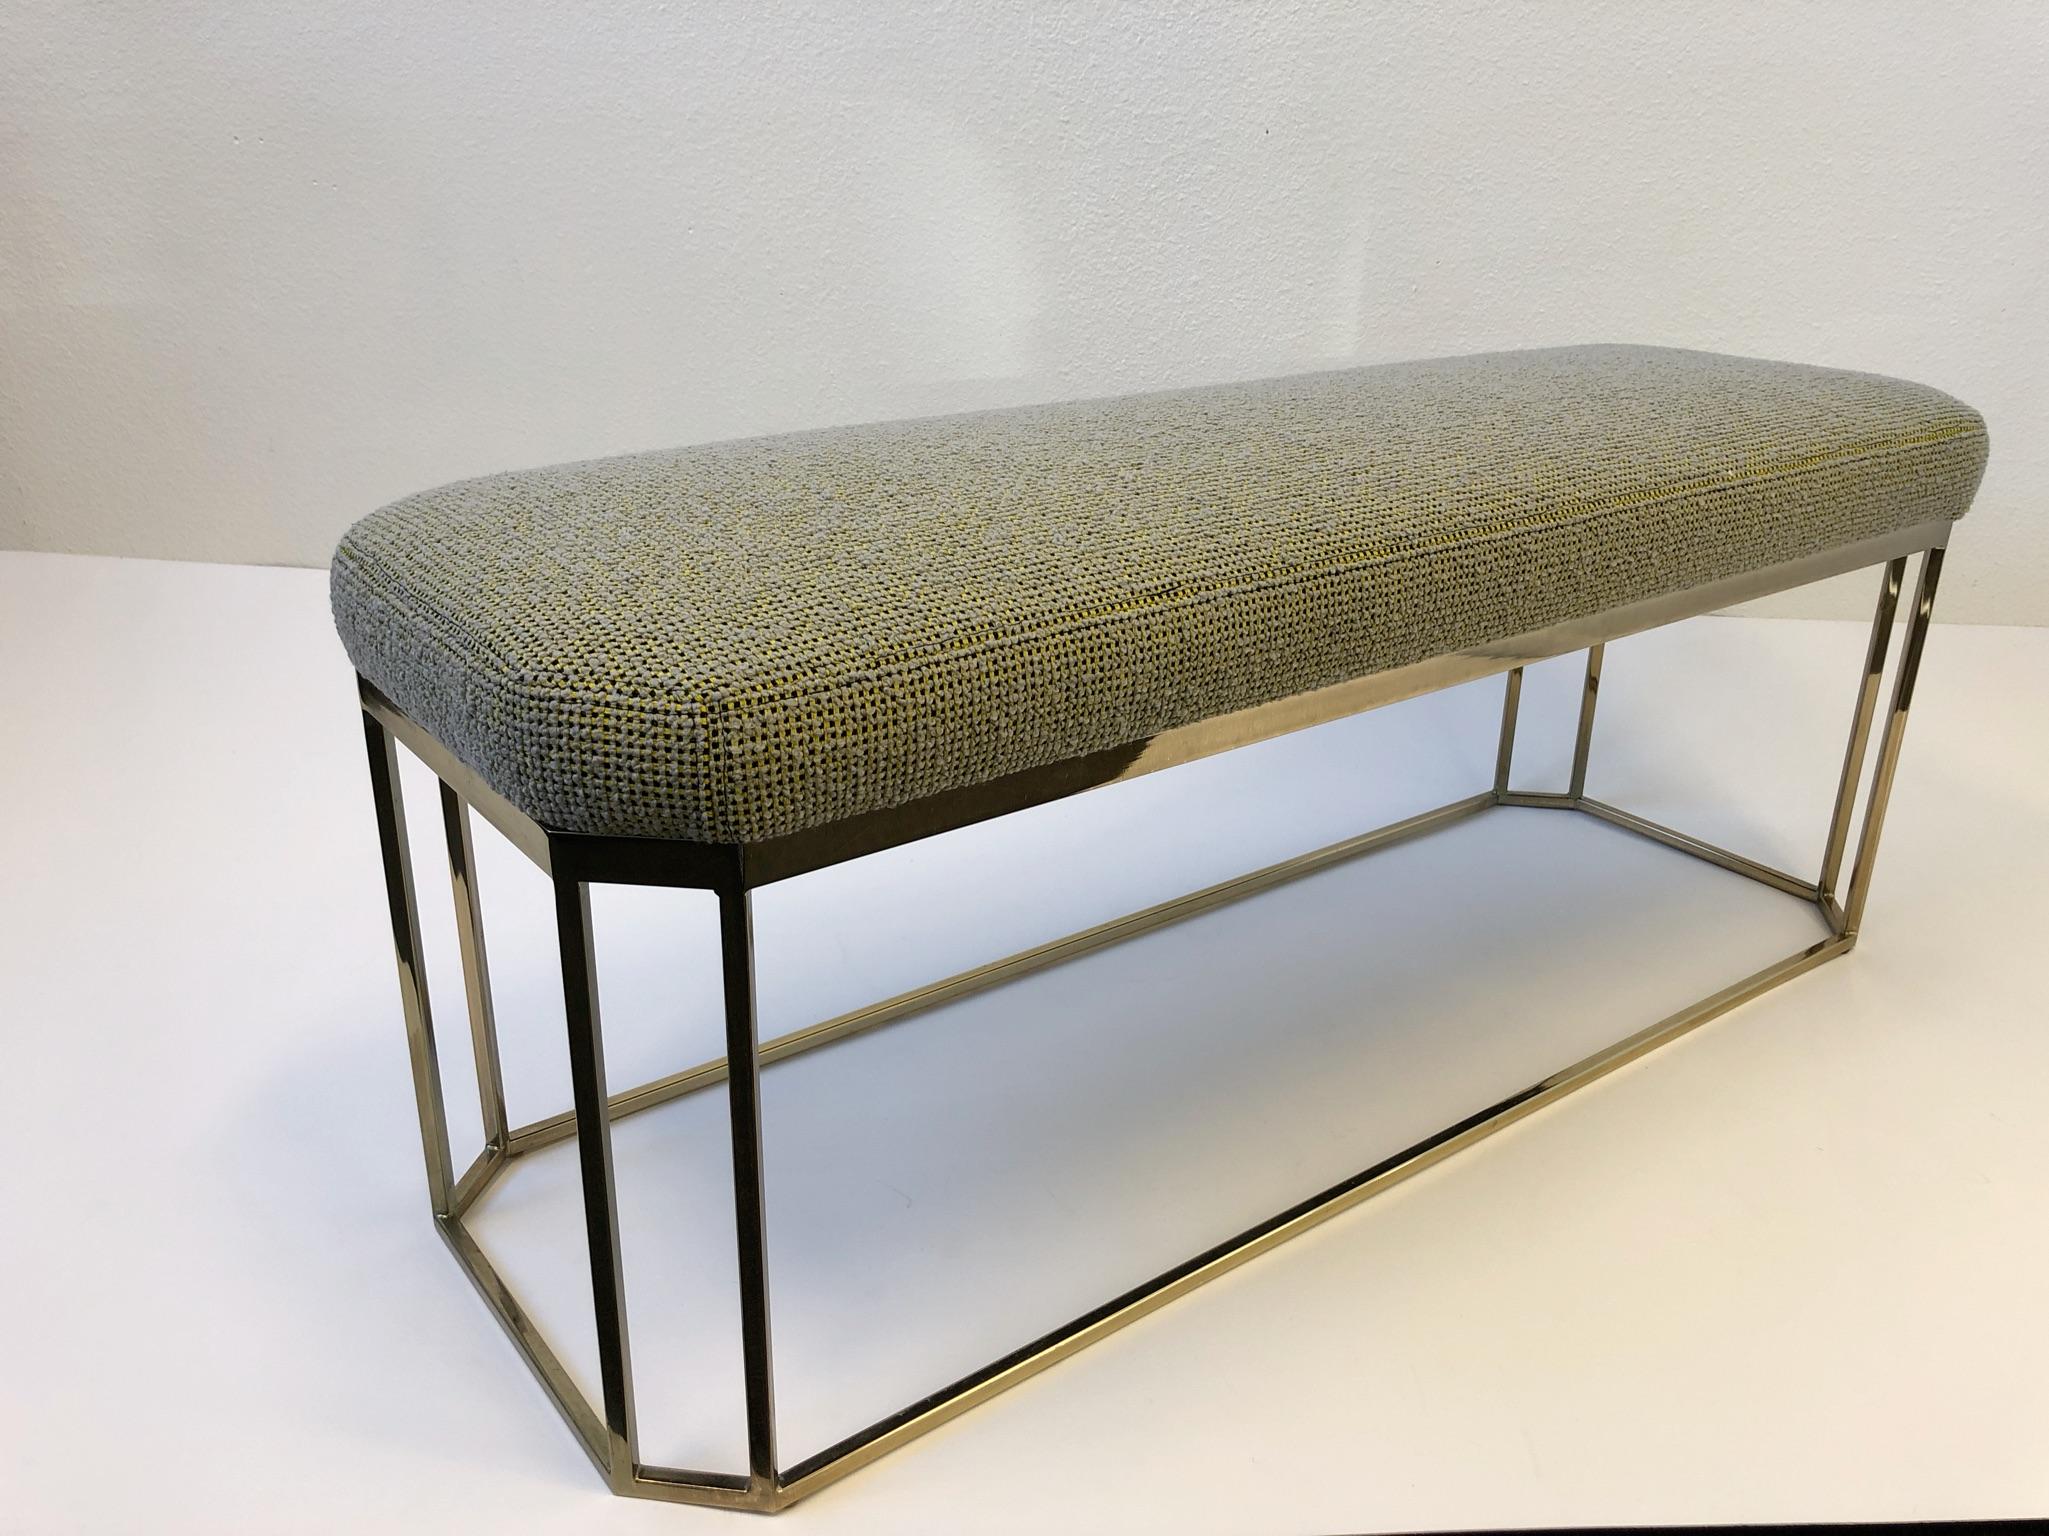 A glamorous 1970s hexagonal shape “Thin Line” polish brass bench by Milo Baughman. The bench has been newly recovered in this beautiful natural wool with yellow and black in a grid pattern (see detail photos) the brass frame is in original